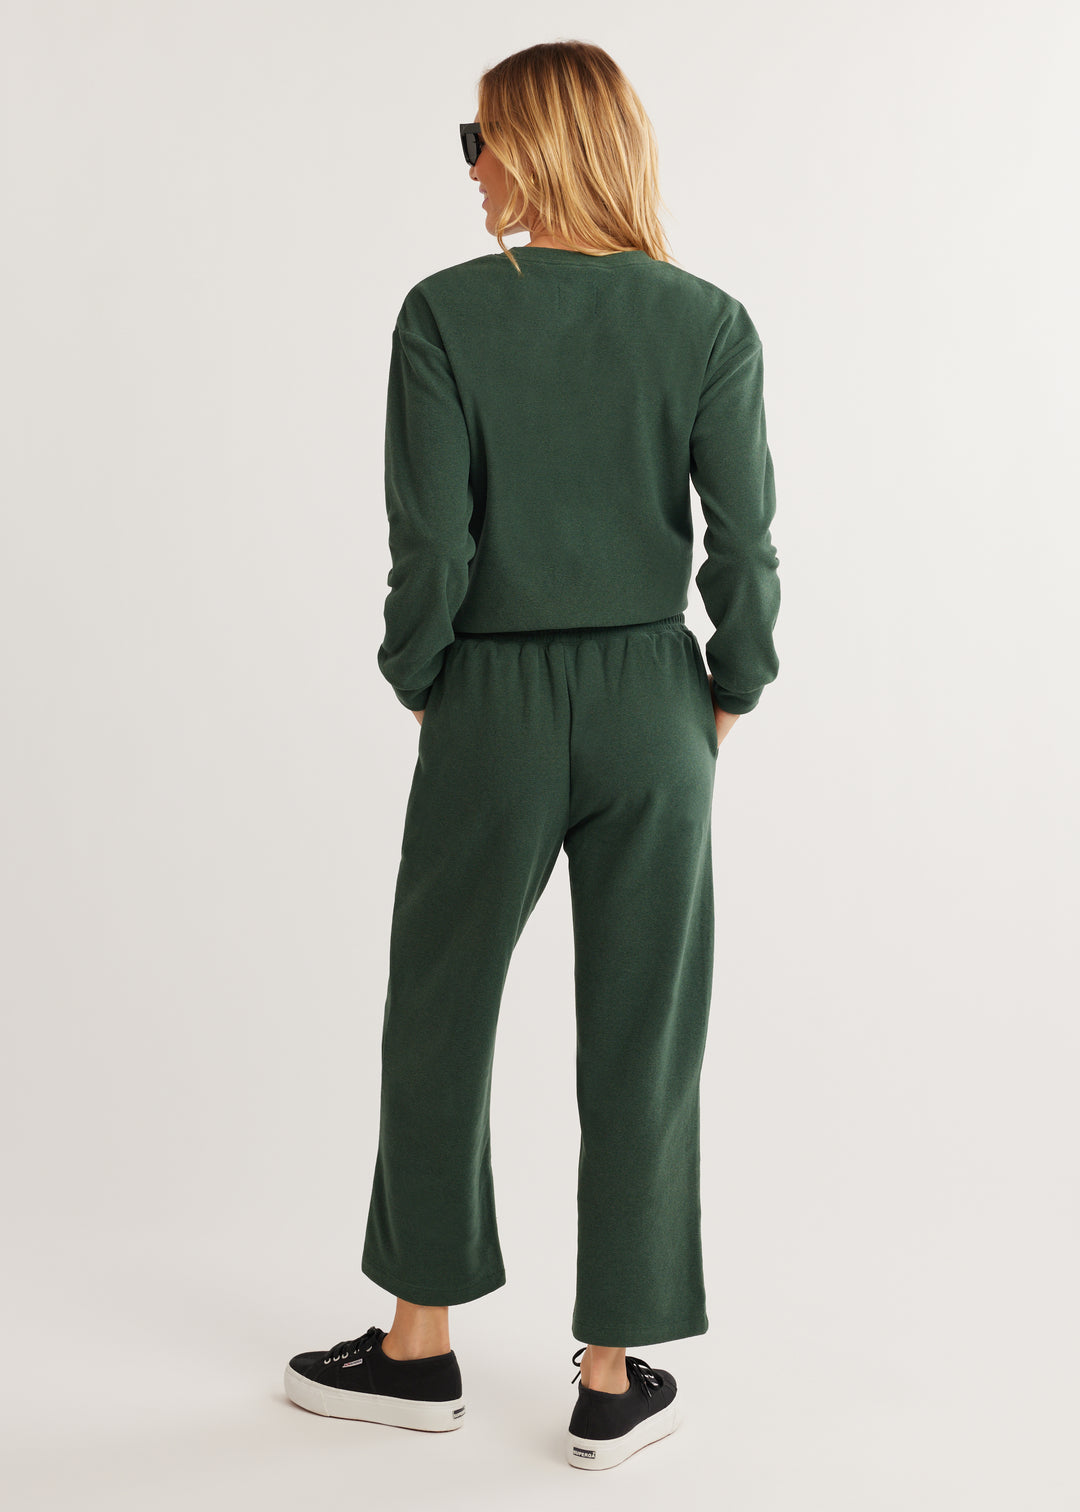 Chateau Lounge Pant in Terry Fleece (Hunter Green)